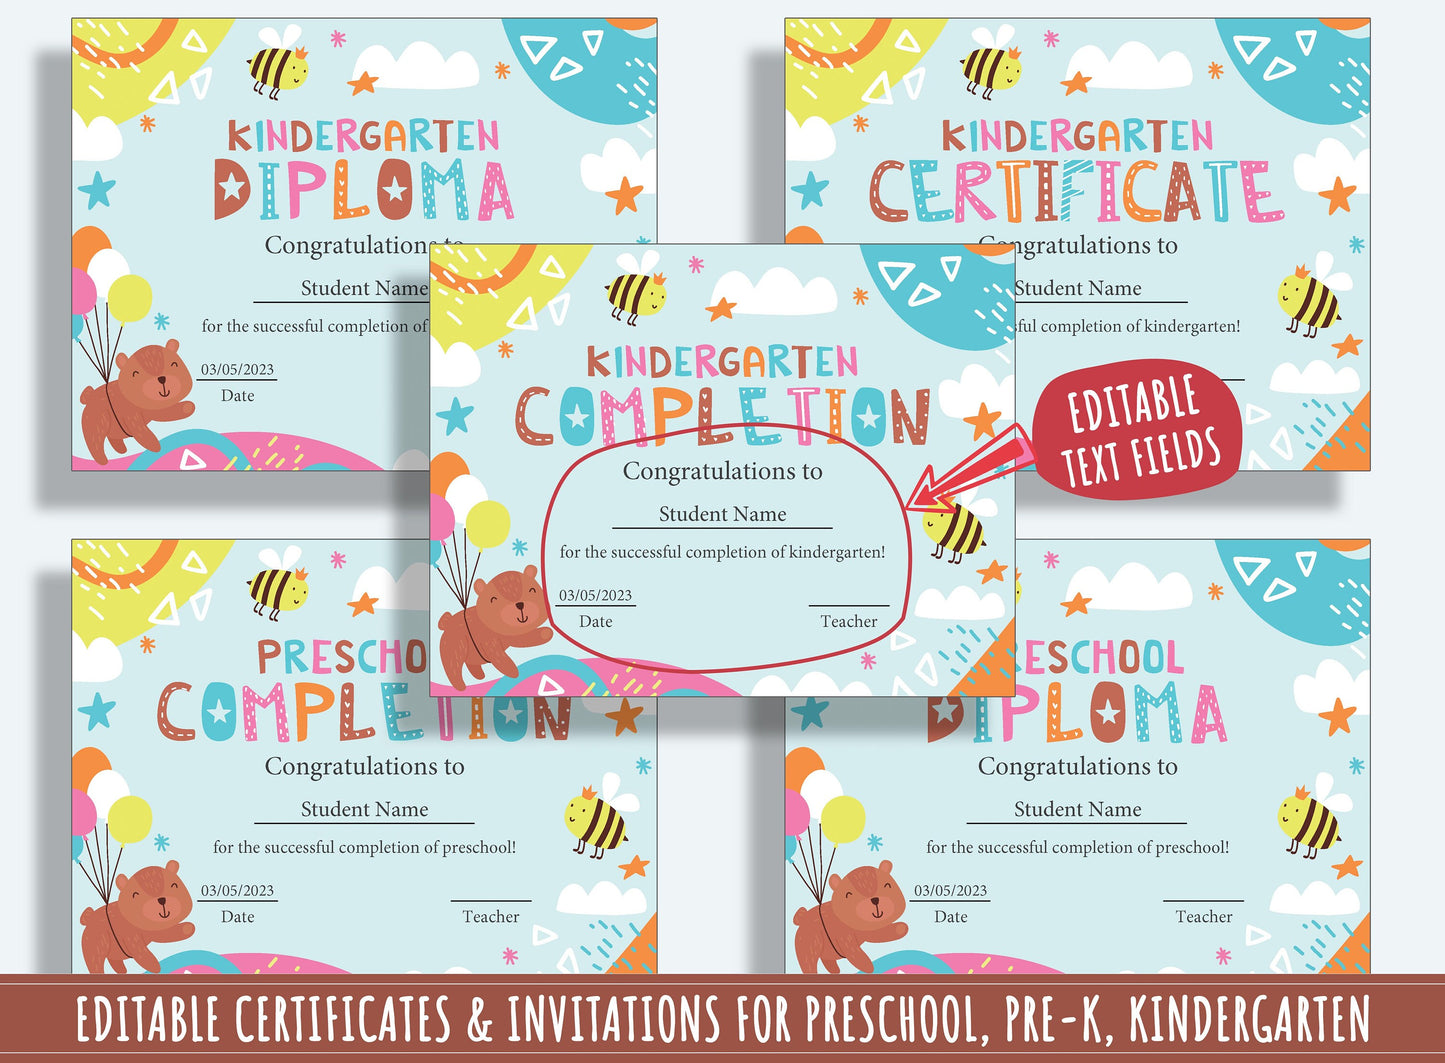 37 Pages of Editable Diploma, Certificate, and Invitation Templates for Preschool and Kindergarten, PDF File, Instant Download